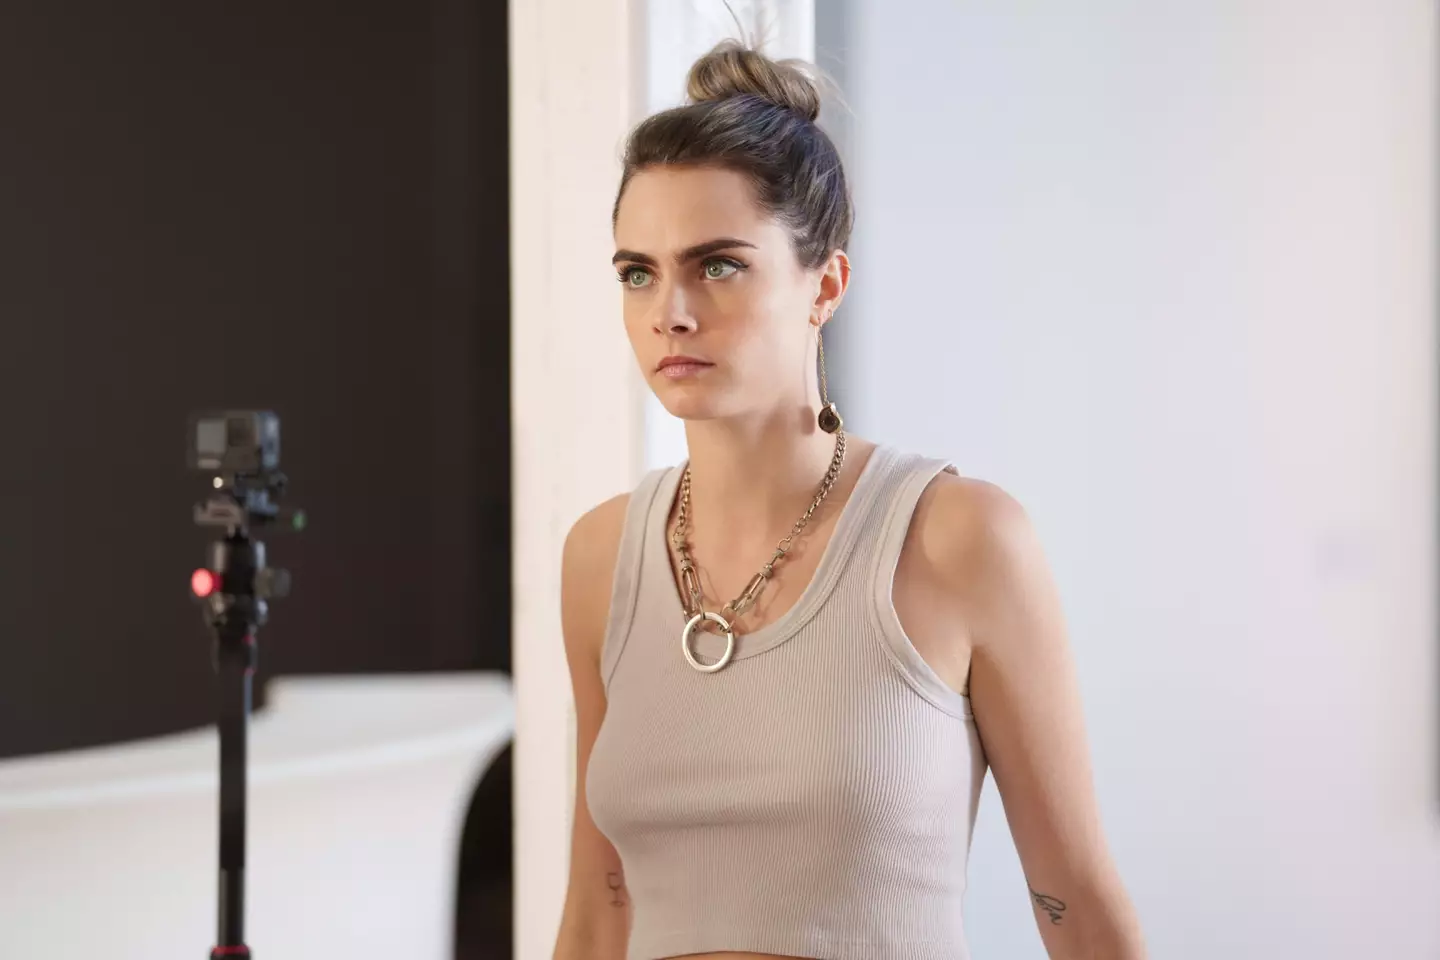 Cara Delevingne recently appeared in Only Murders In The Building.